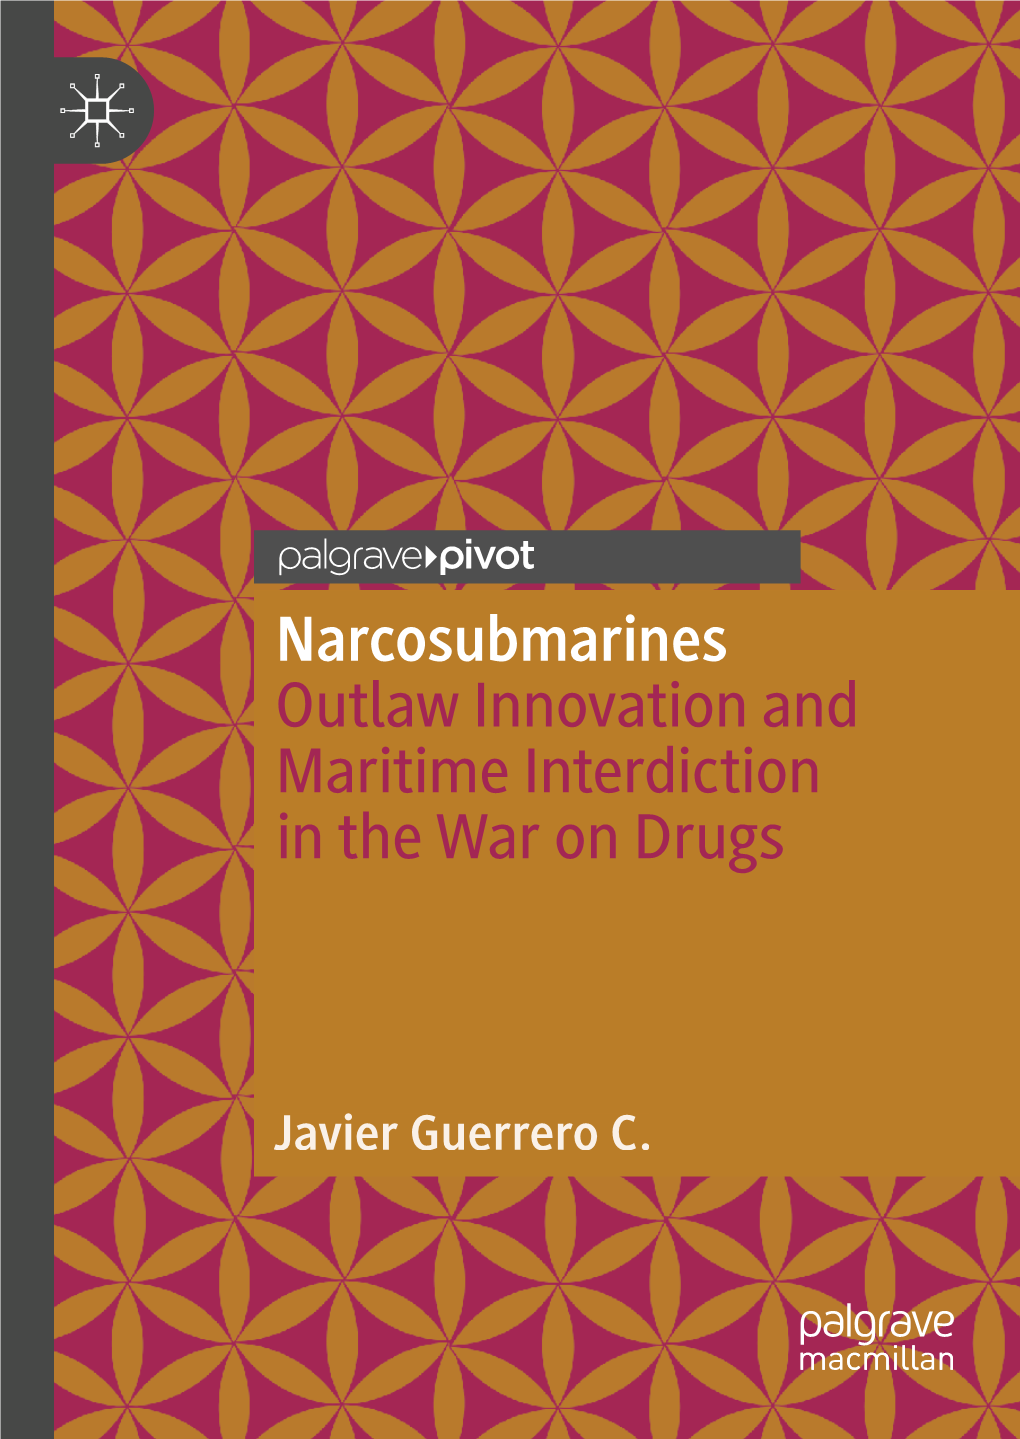 Narcosubmarines Outlaw Innovation and Maritime Interdiction in the War on Drugs